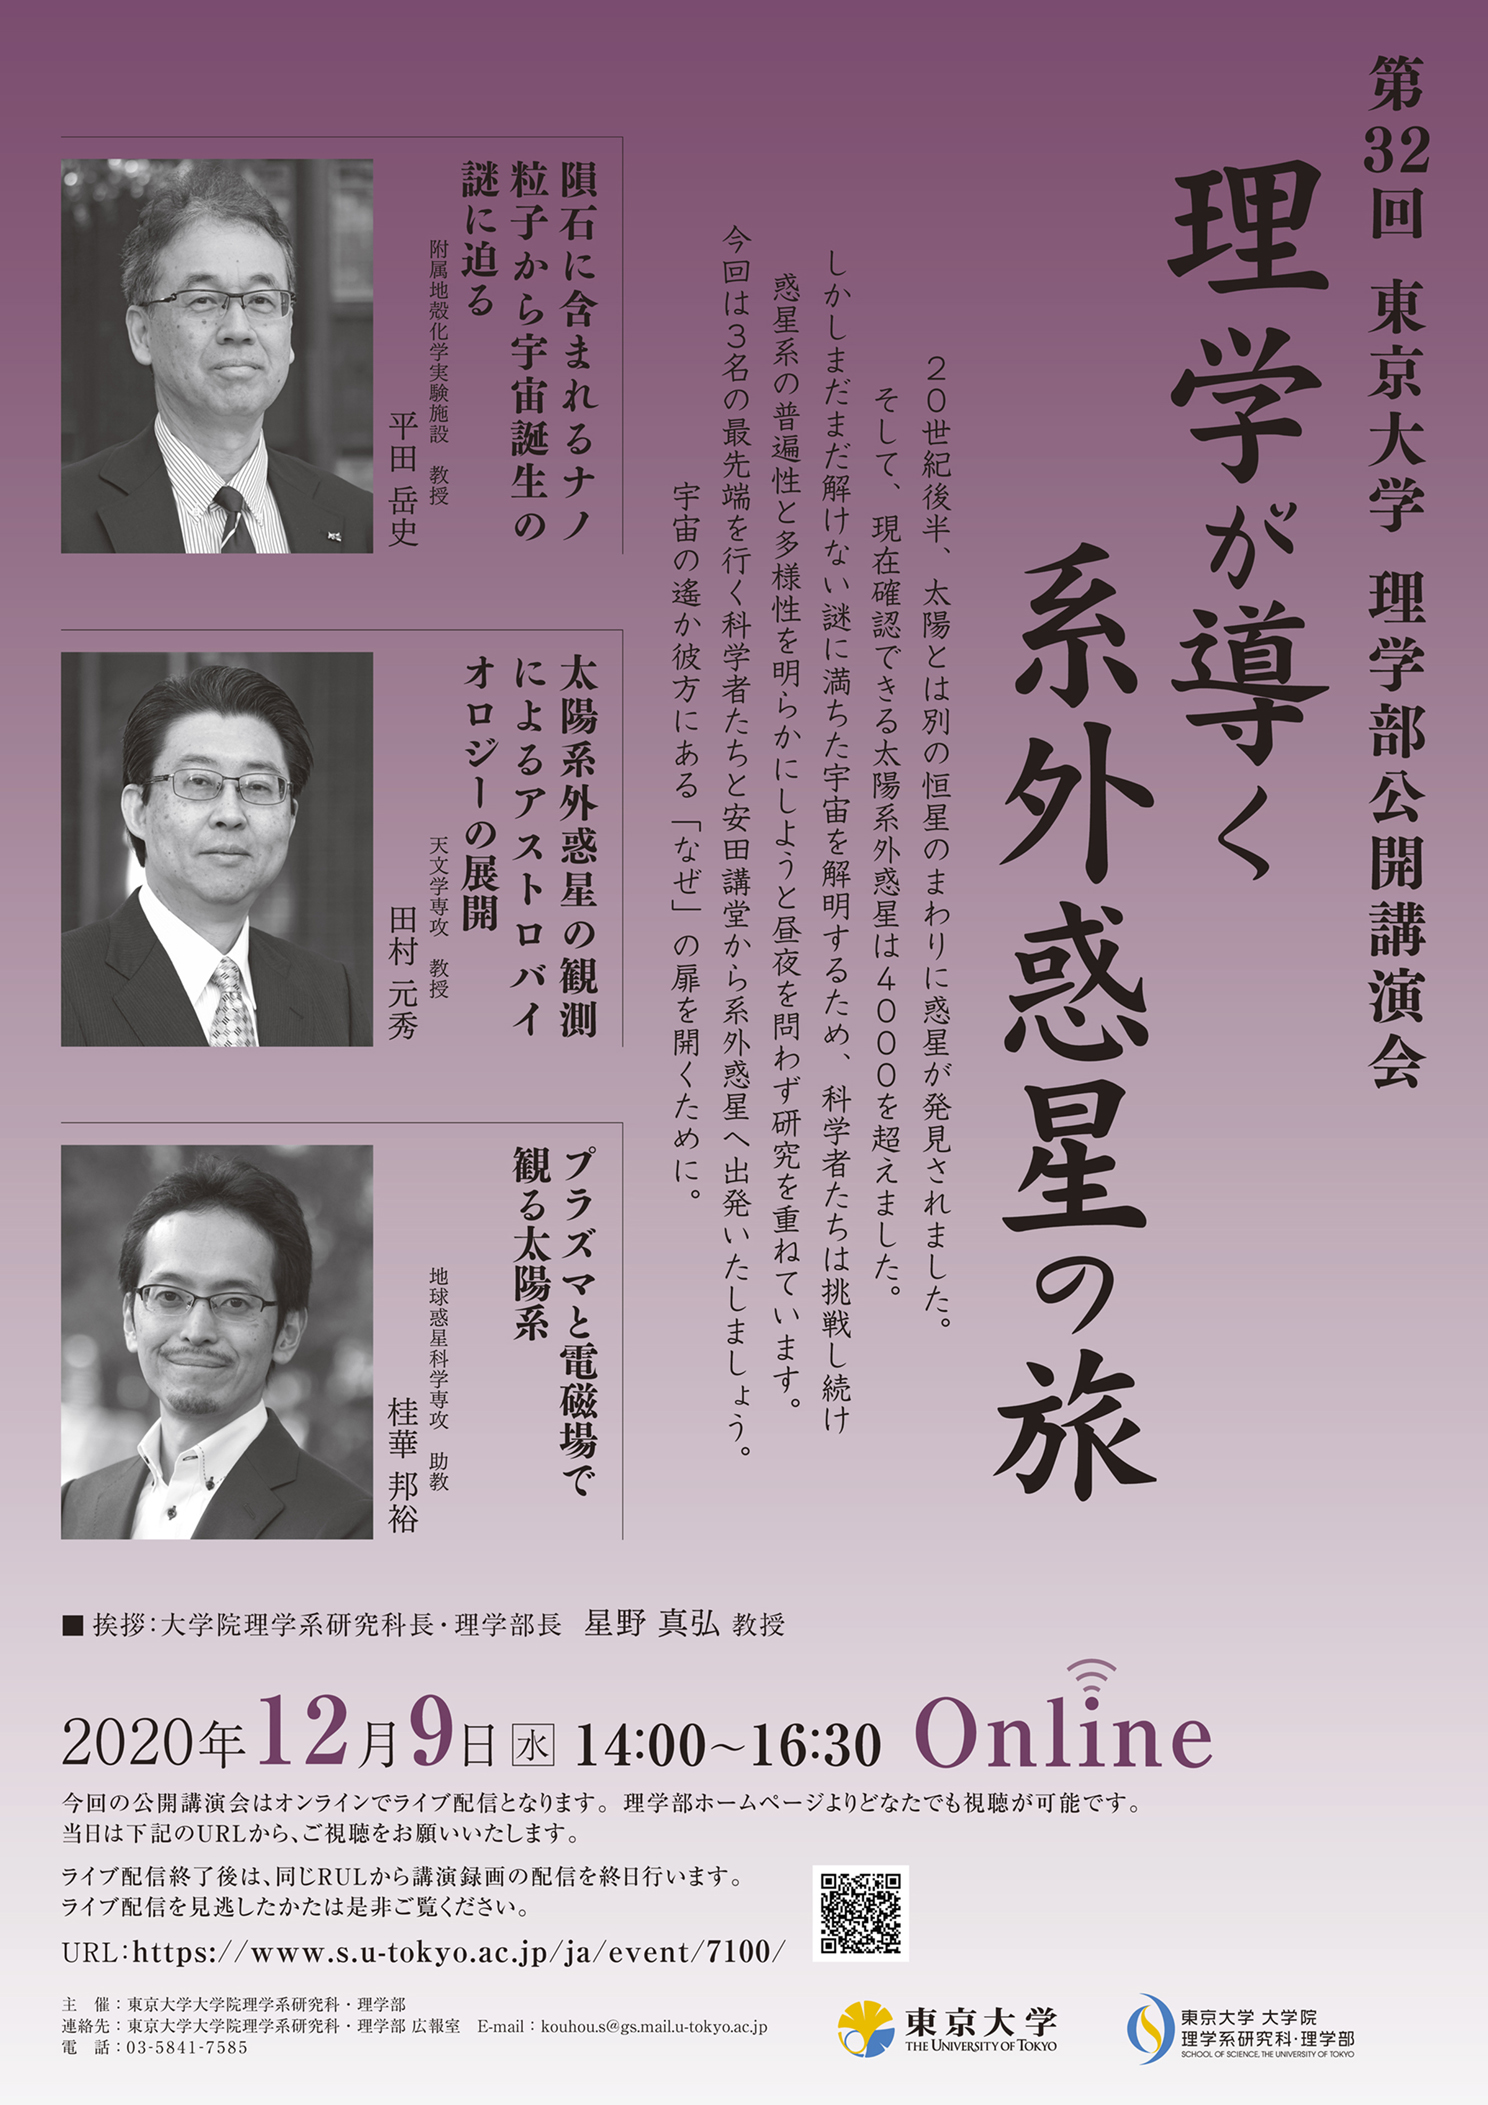 The 32nd Public Lecture of Faculty of Science, The University of Tokyo Online